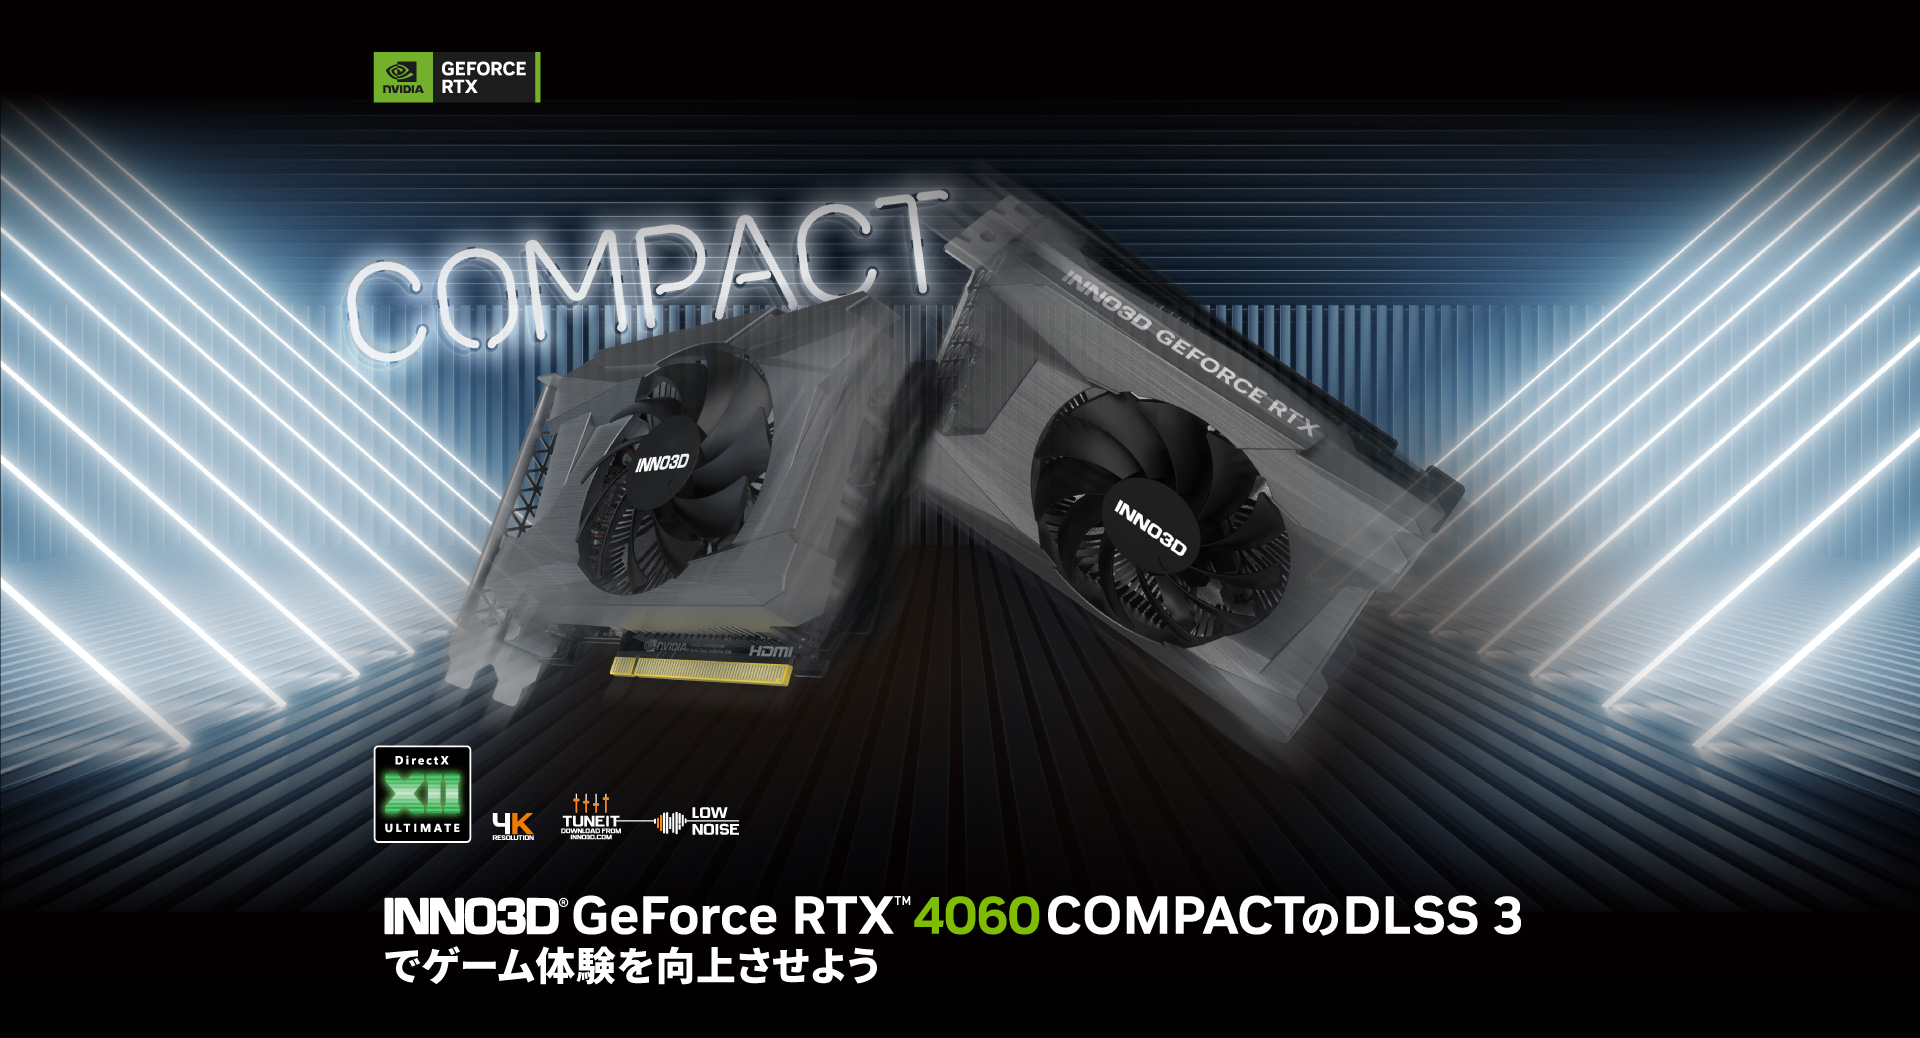 INNO3D GeForce RTX 4060 COMPACT DLSS3 でゲーム体験を向上させよう